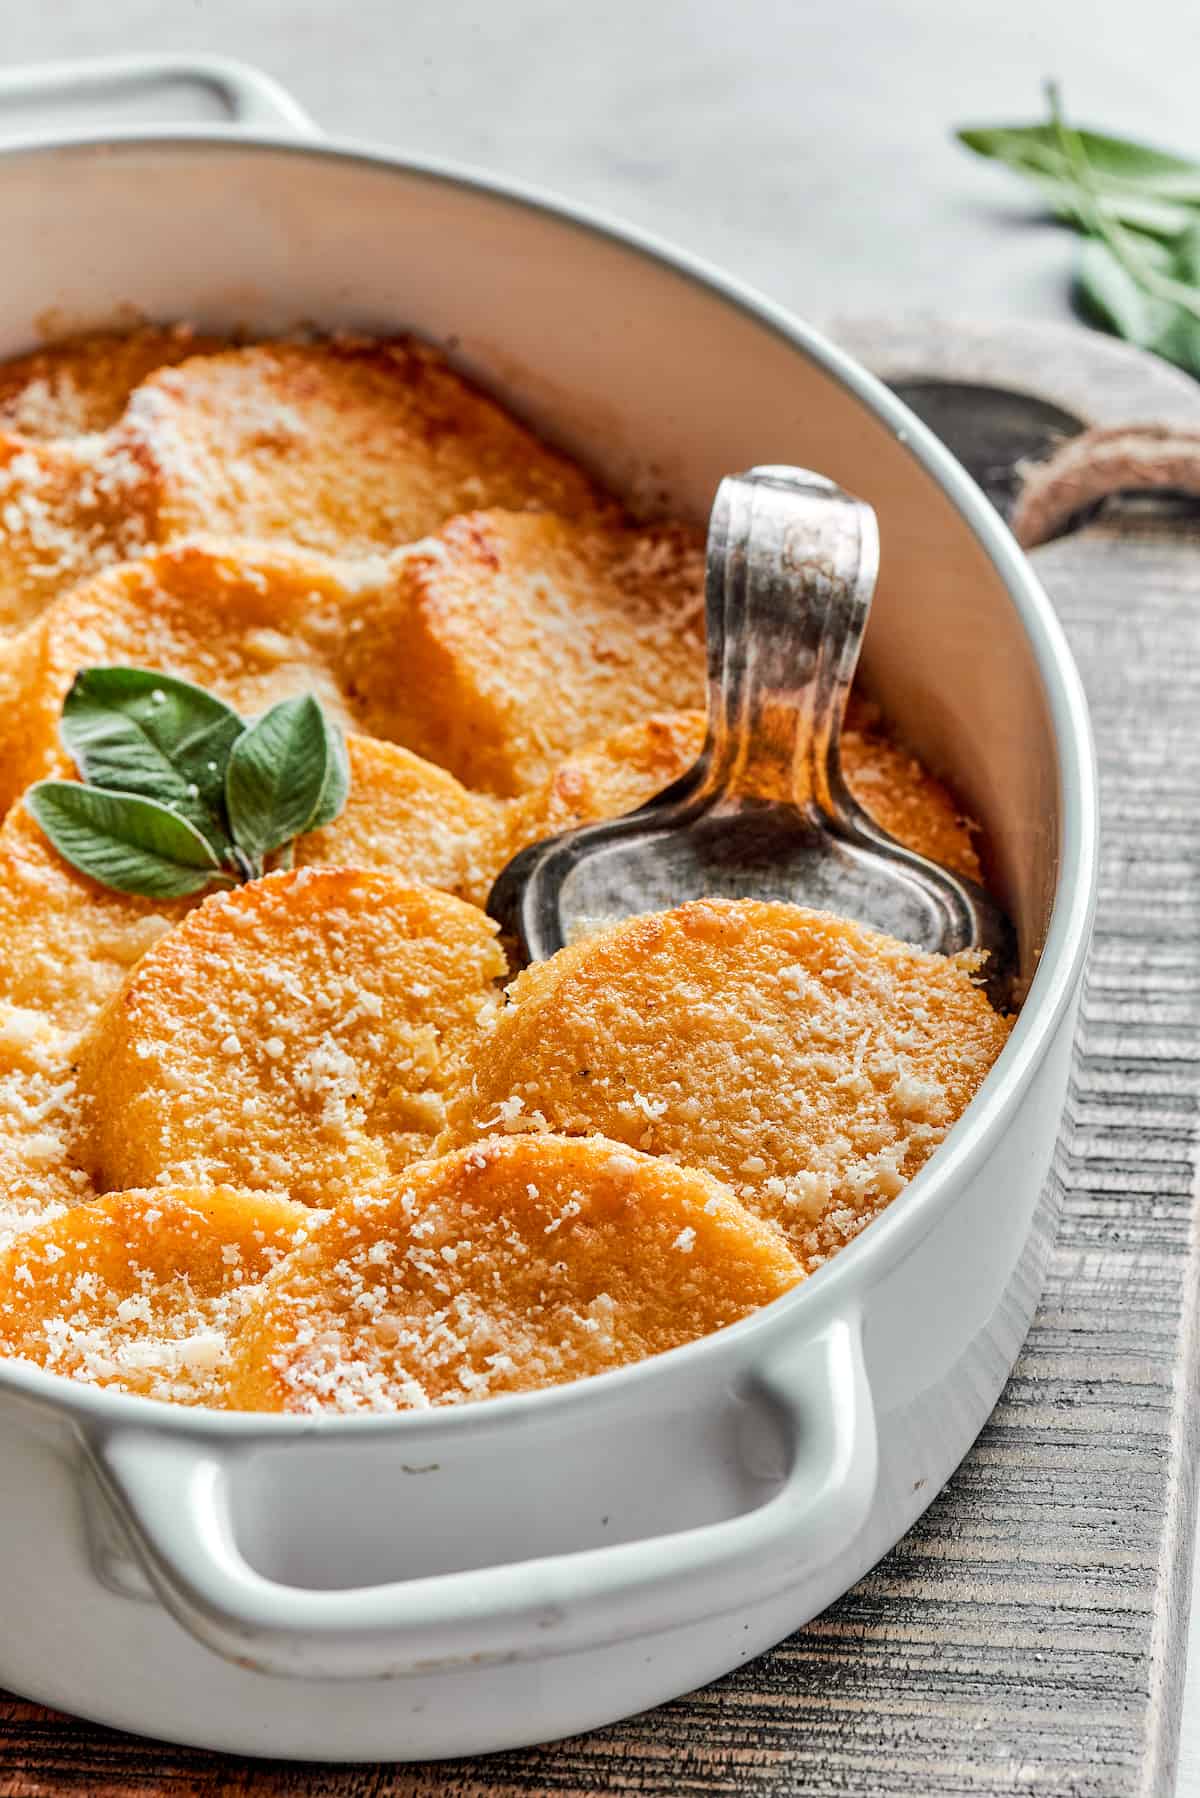 A serving dish of buttered gnocchi with parmesan.